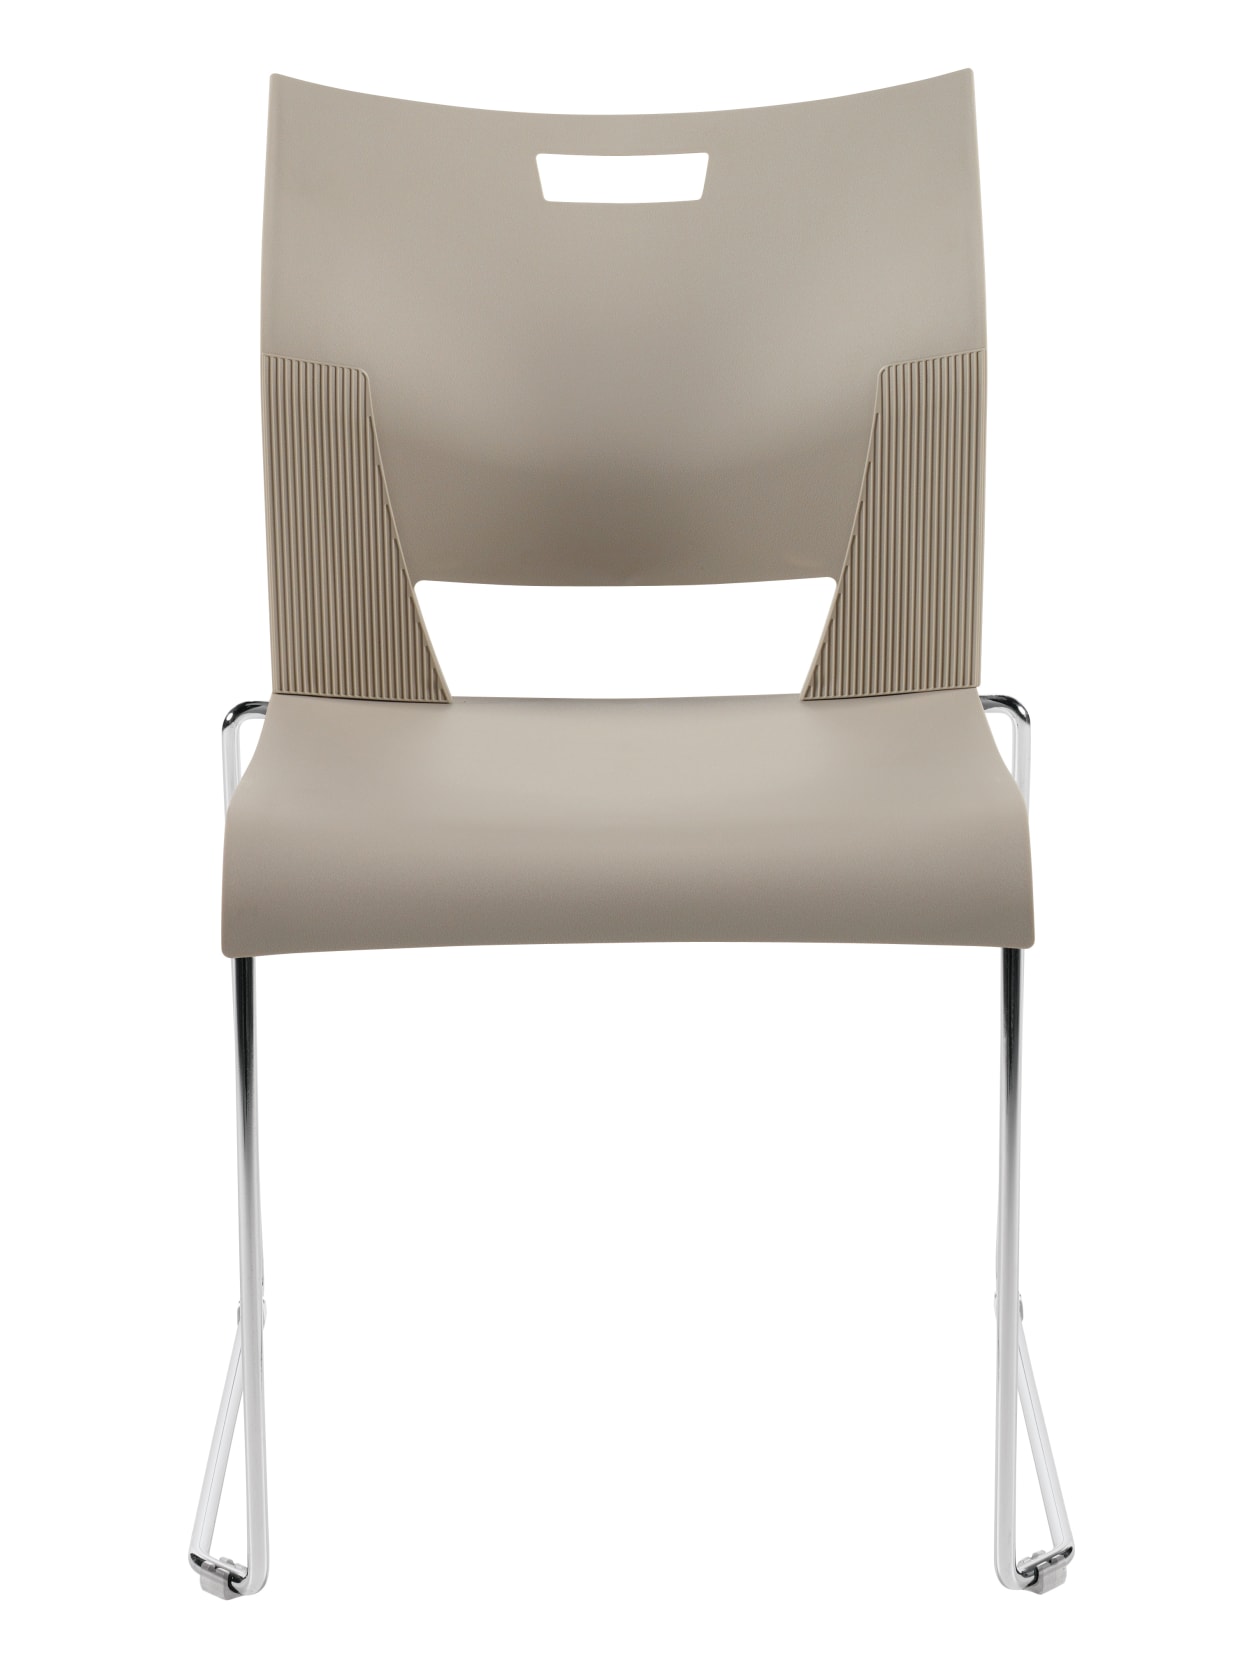 global® duet stacking chairs armless 32 14"h x 20 12"w x 22 12"d  latte beige pack of 4 item  1529056